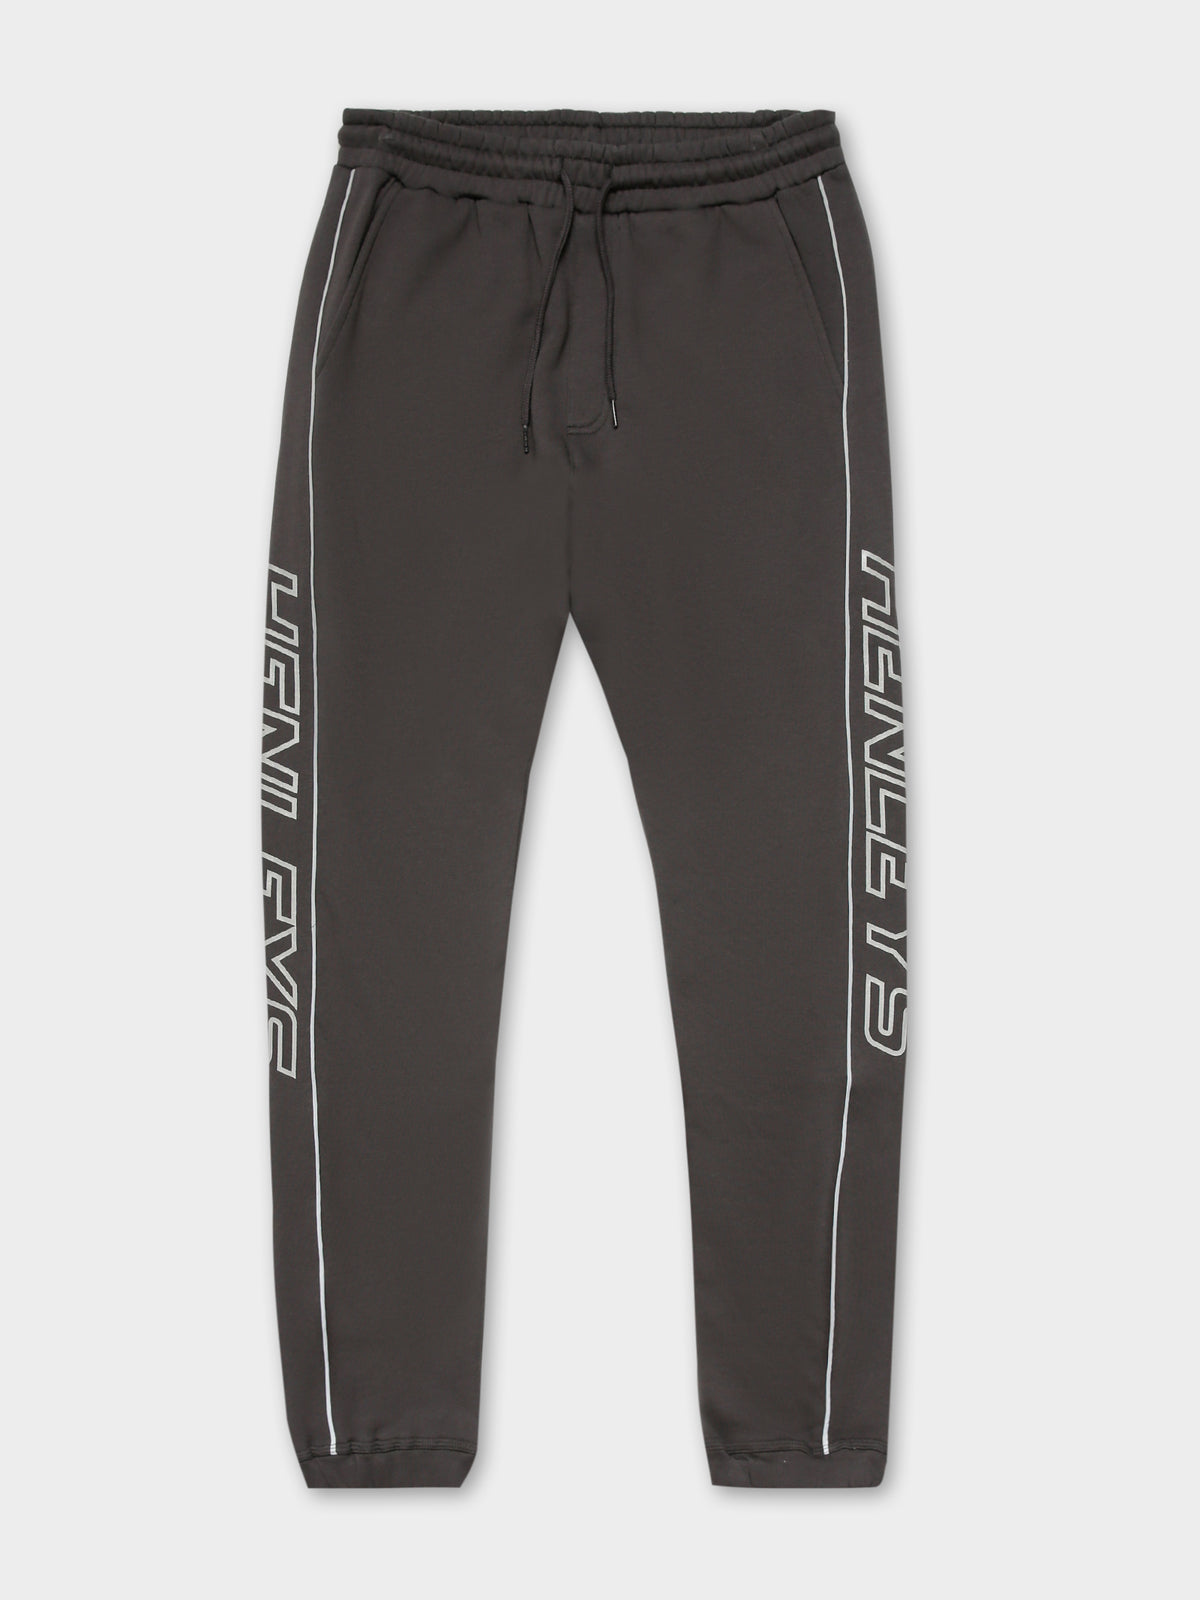 Master Reflective Trackpants in Coal Grey